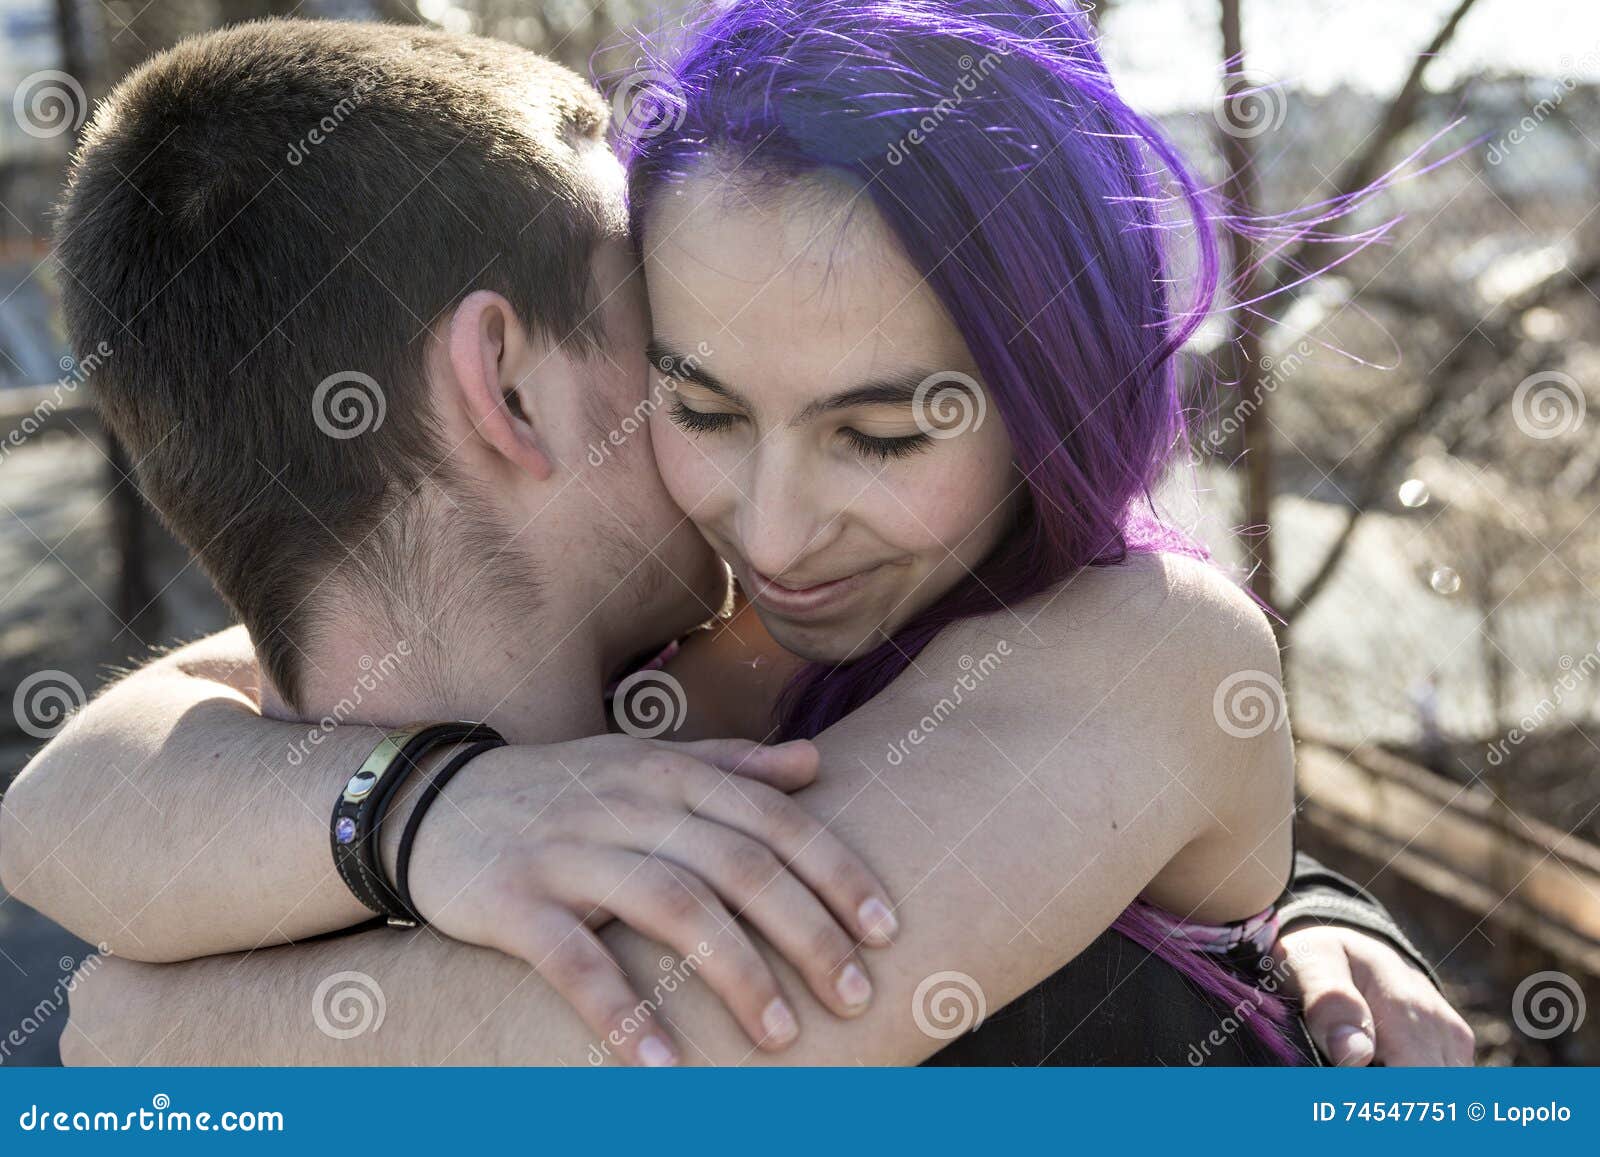 Lover Teen Couple Outdoors Stock Image Image Of Romance 7454